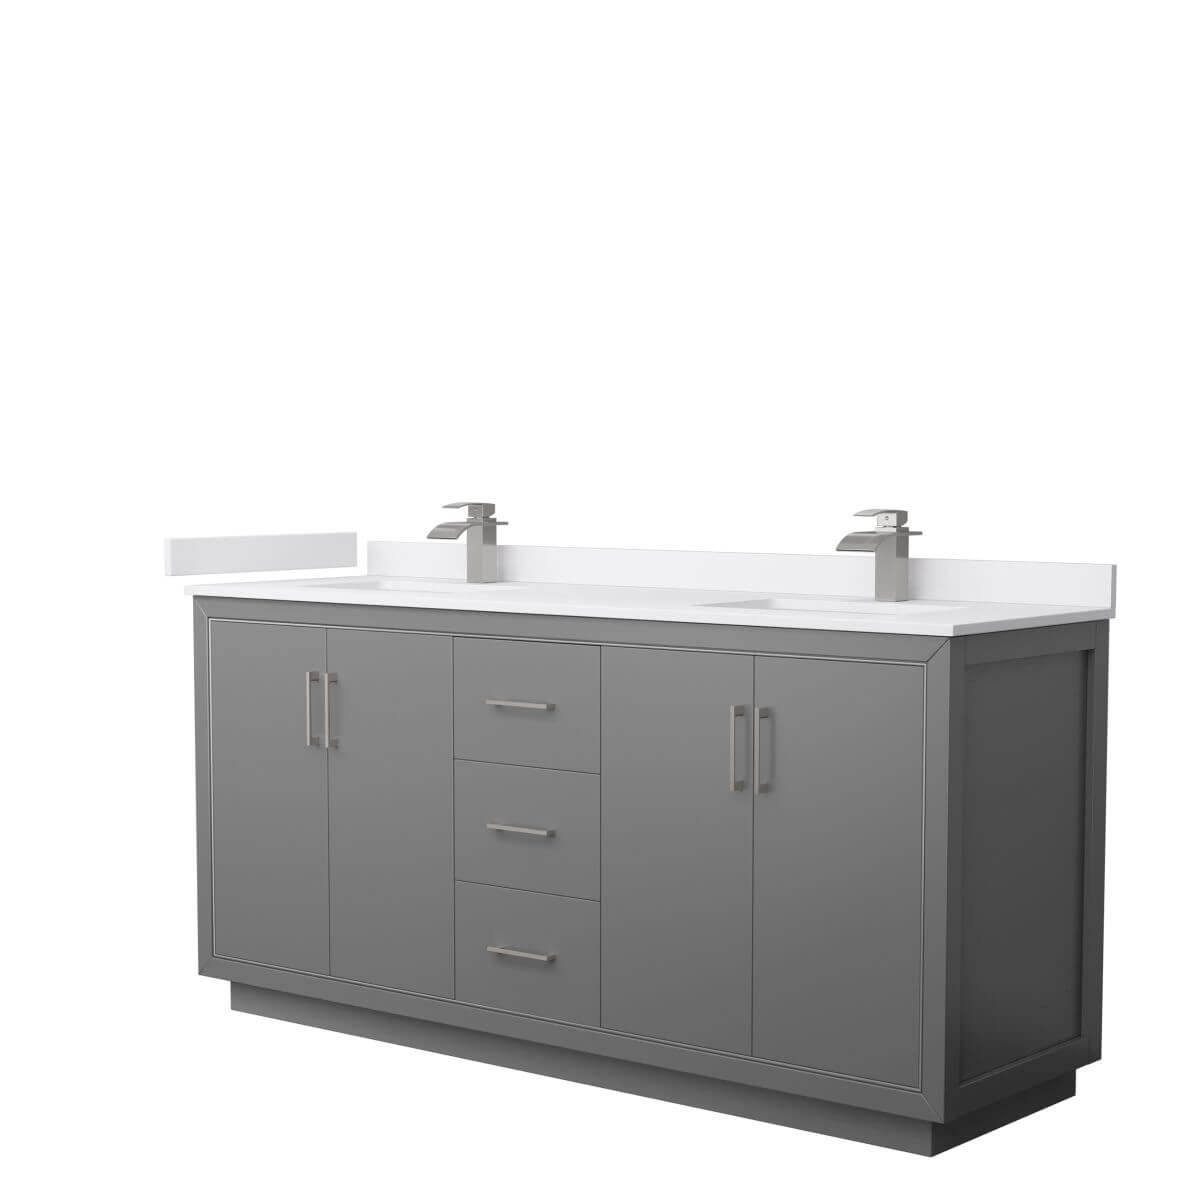 Wyndham Collection WCF111172DKGWCUNSMXX Icon 72 inch Double Bathroom Vanity in Dark Gray with White Cultured Marble Countertop, Undermount Square Sinks and Brushed Nickel Trim